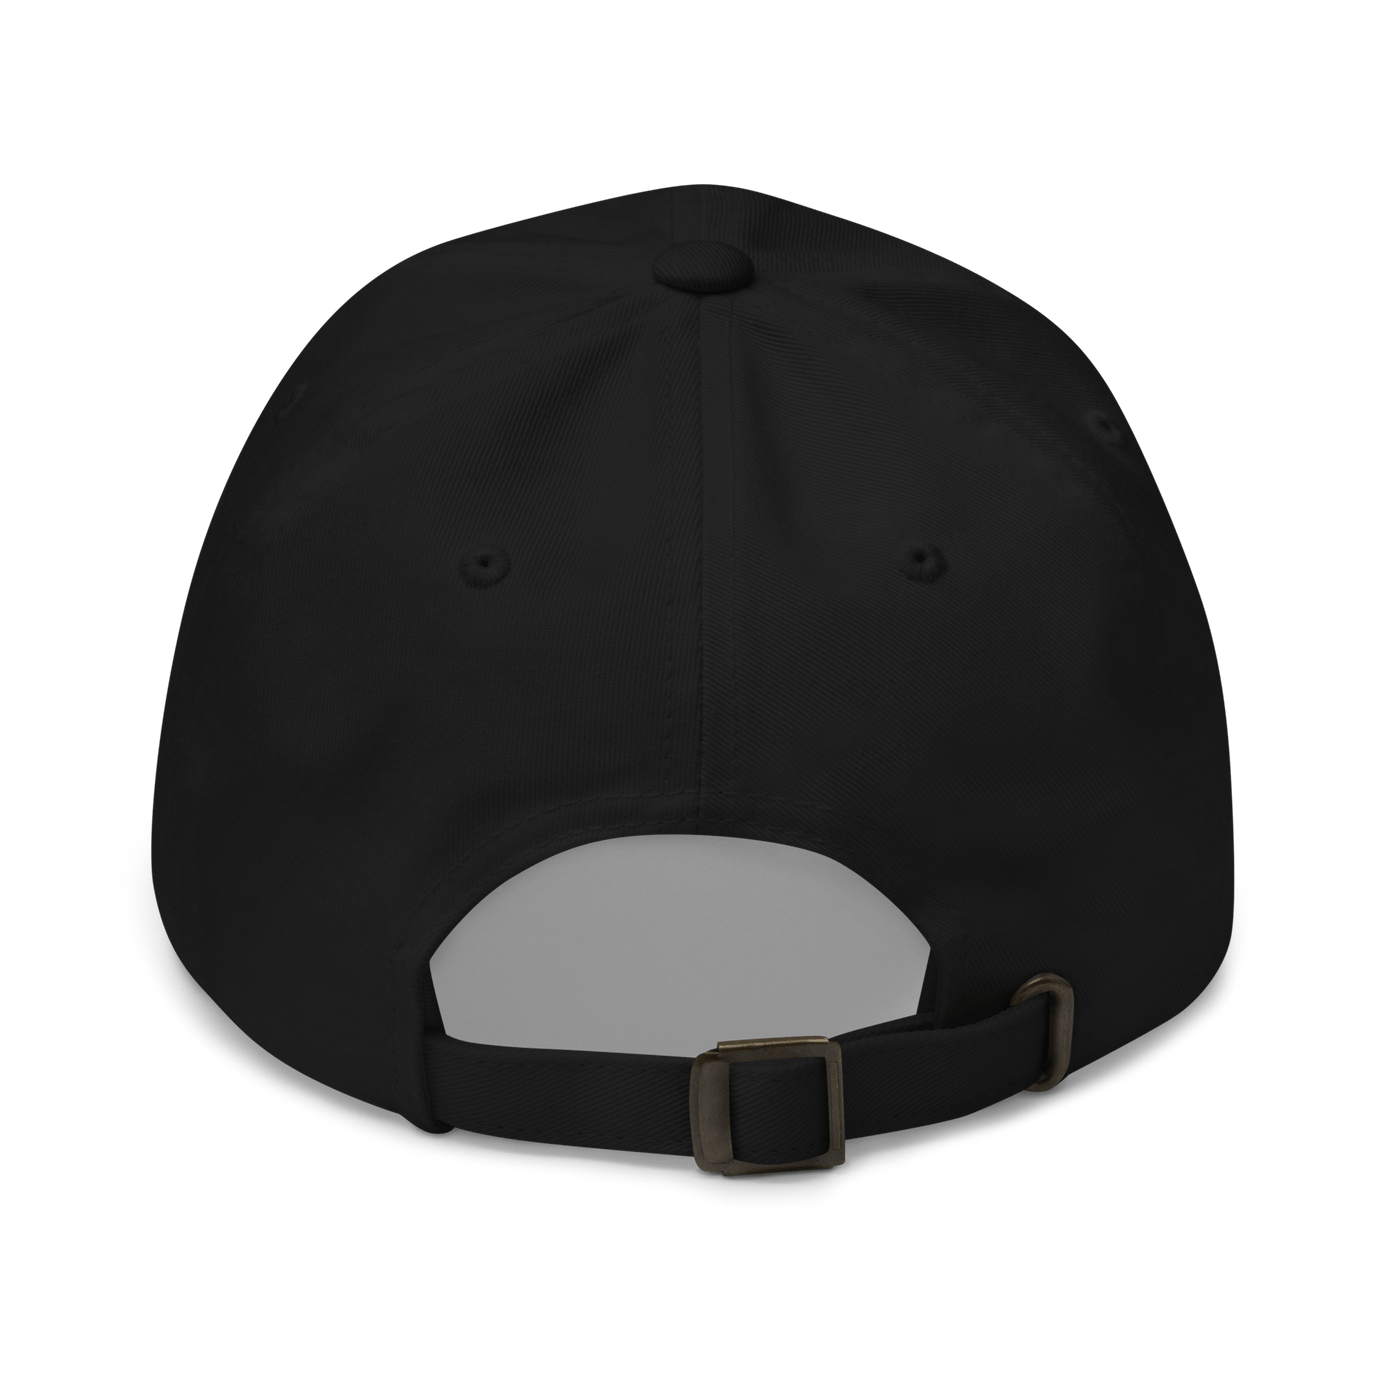 Future Dilf Dad hat - Black - - Just Another Cap Store